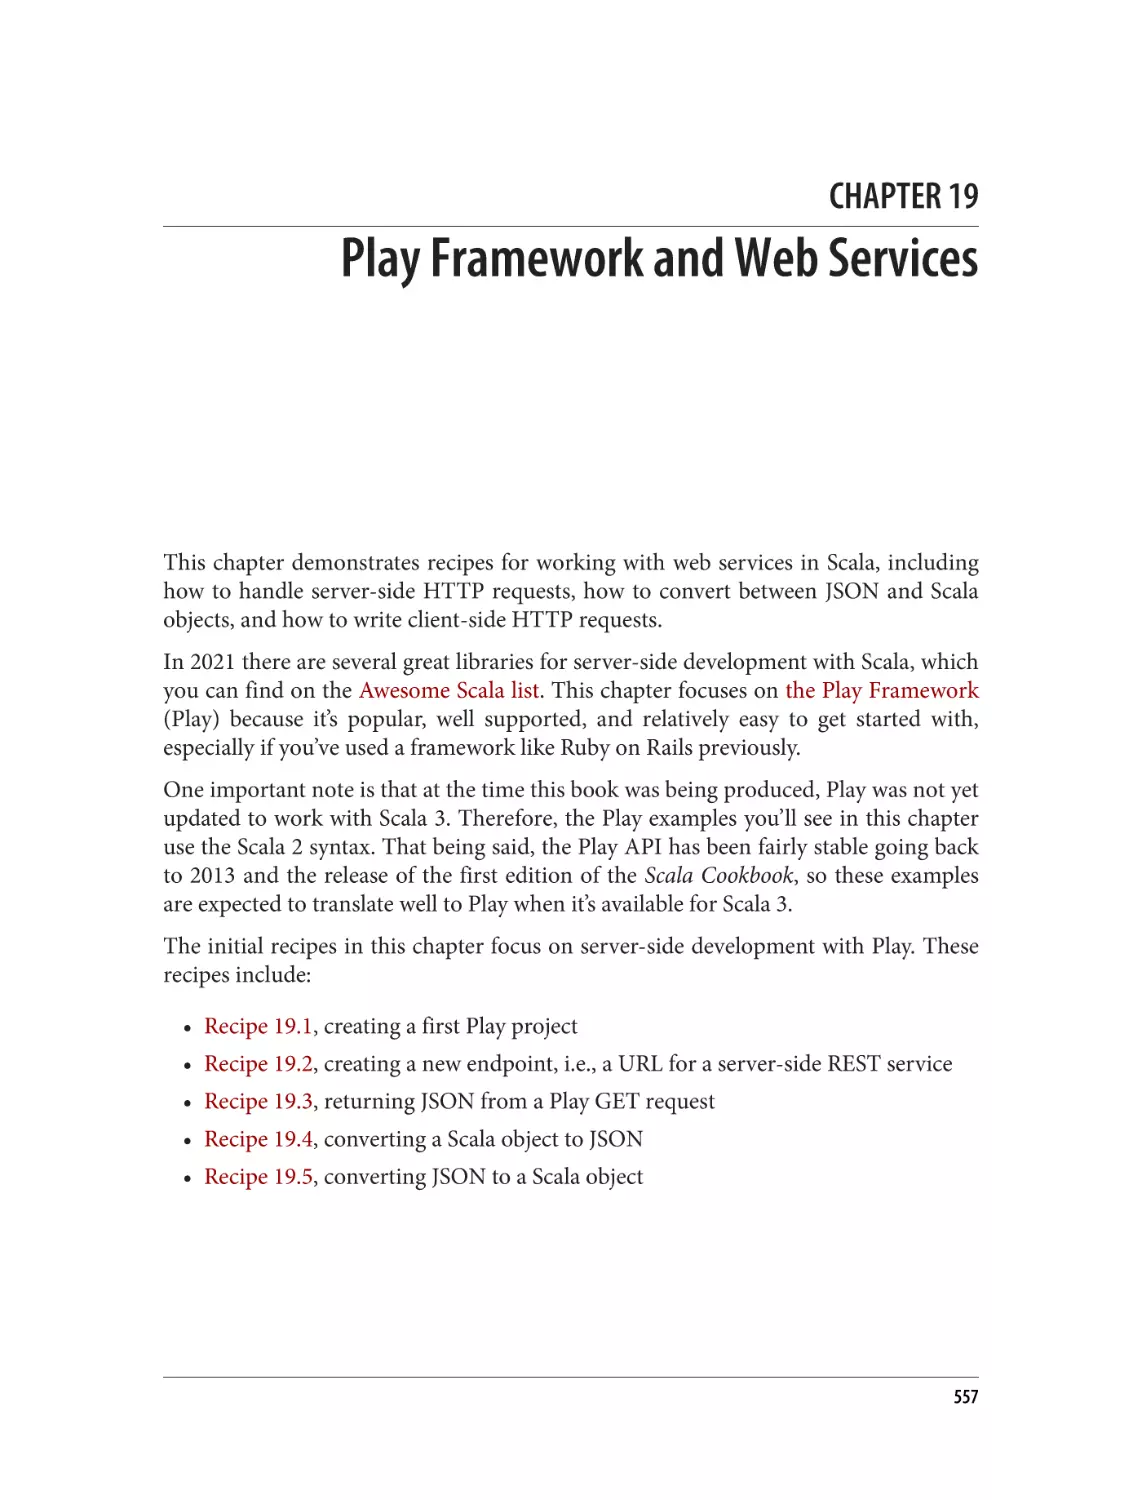 Chapter 19. Play Framework and Web Services